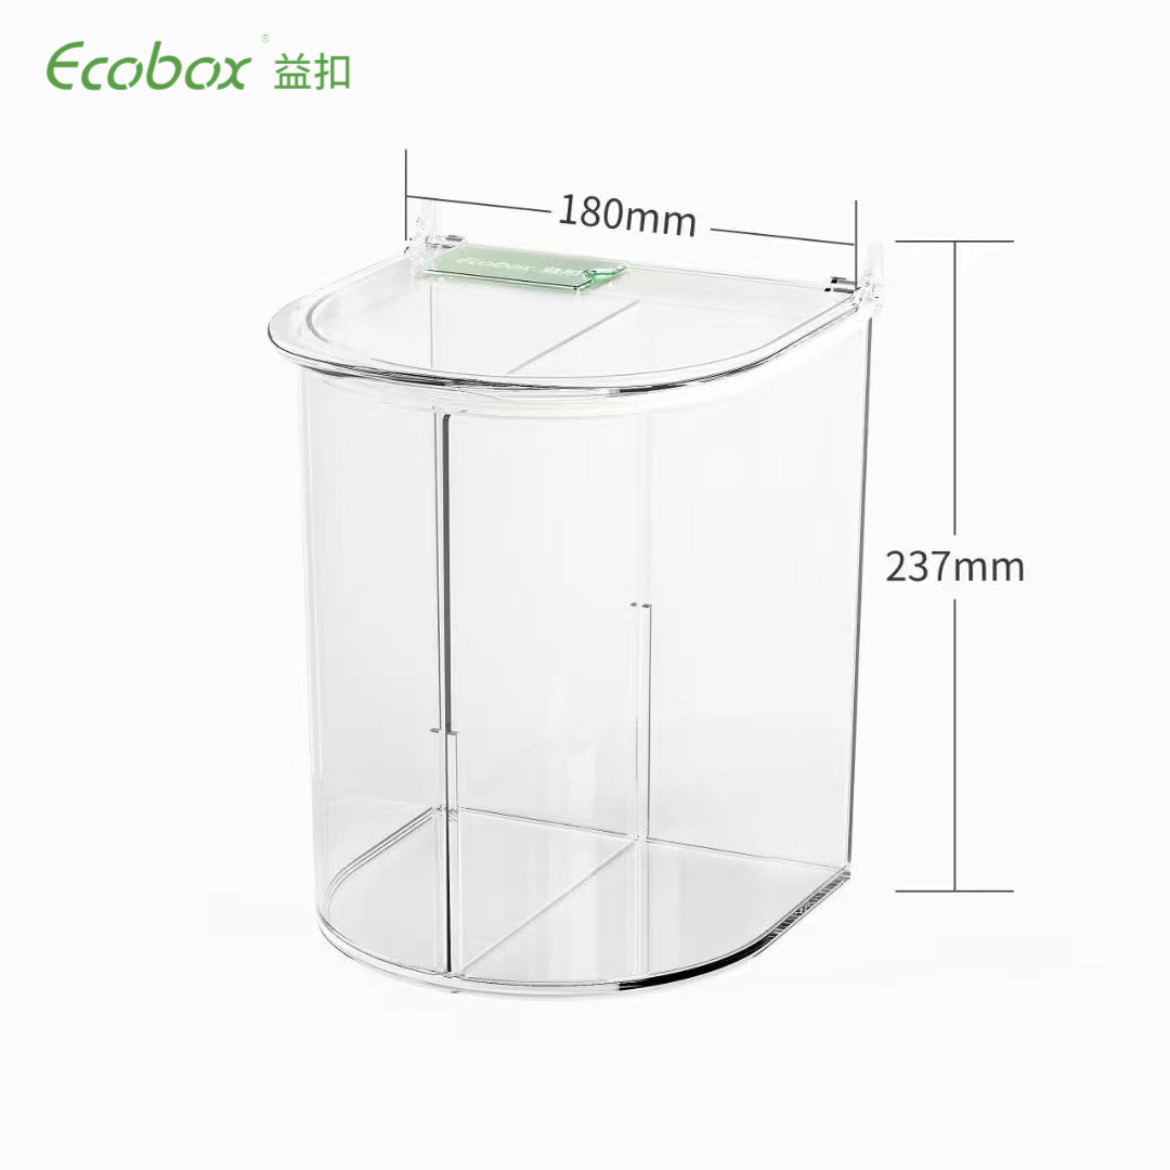 Ecobox MY-0101C Supermarket stackable Bulk bin for bulk food and candy